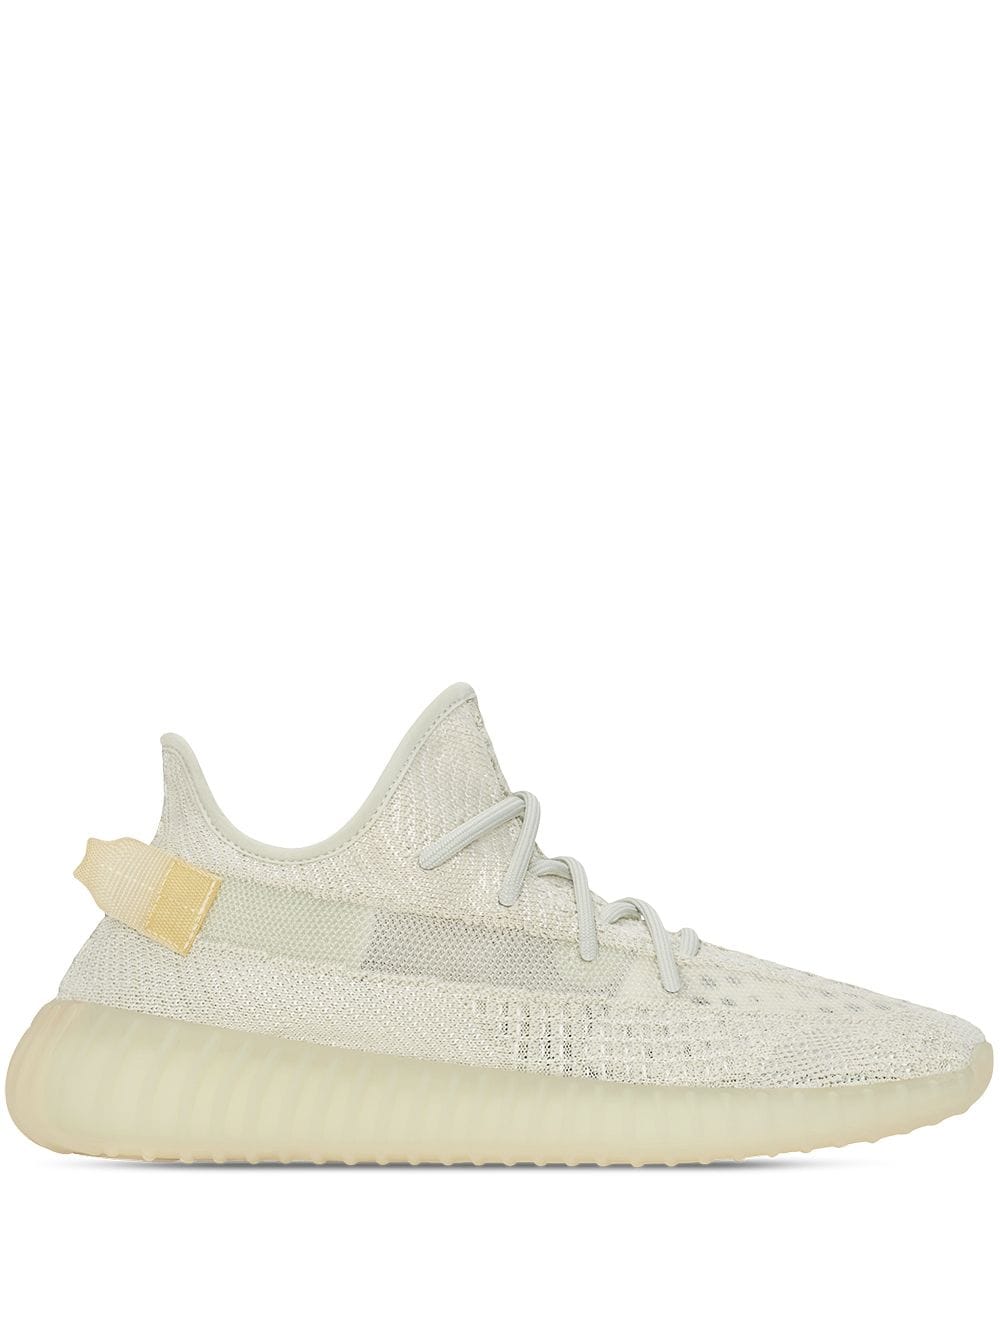 adidas Yeezy Boost 330 V2 low-top sneakers - White von adidas Yeezy